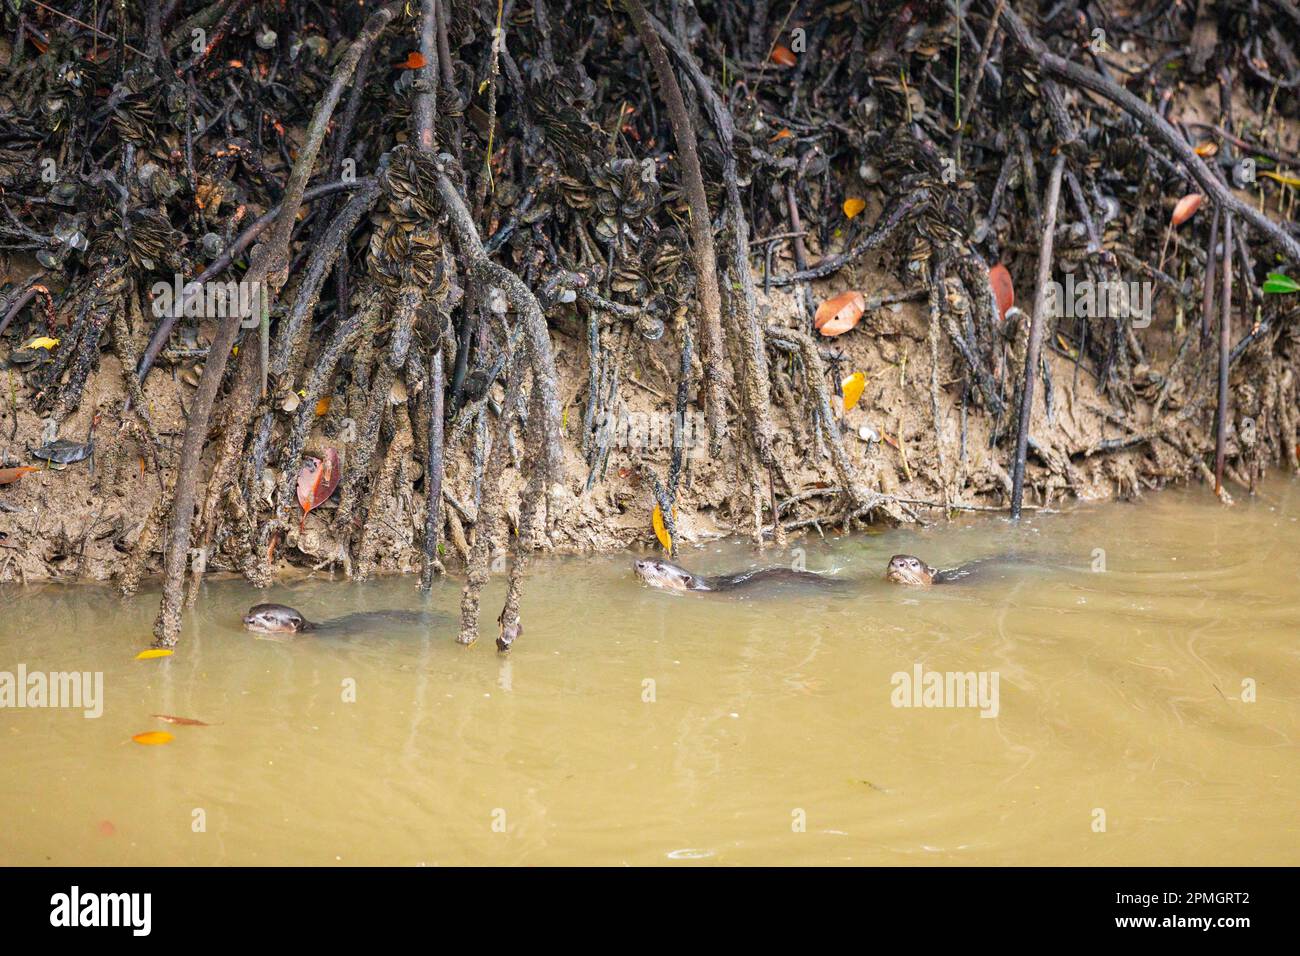 A family of smooth coated otter swimming between the stilt roots of a mangrove tree, Singapore Stock Photo